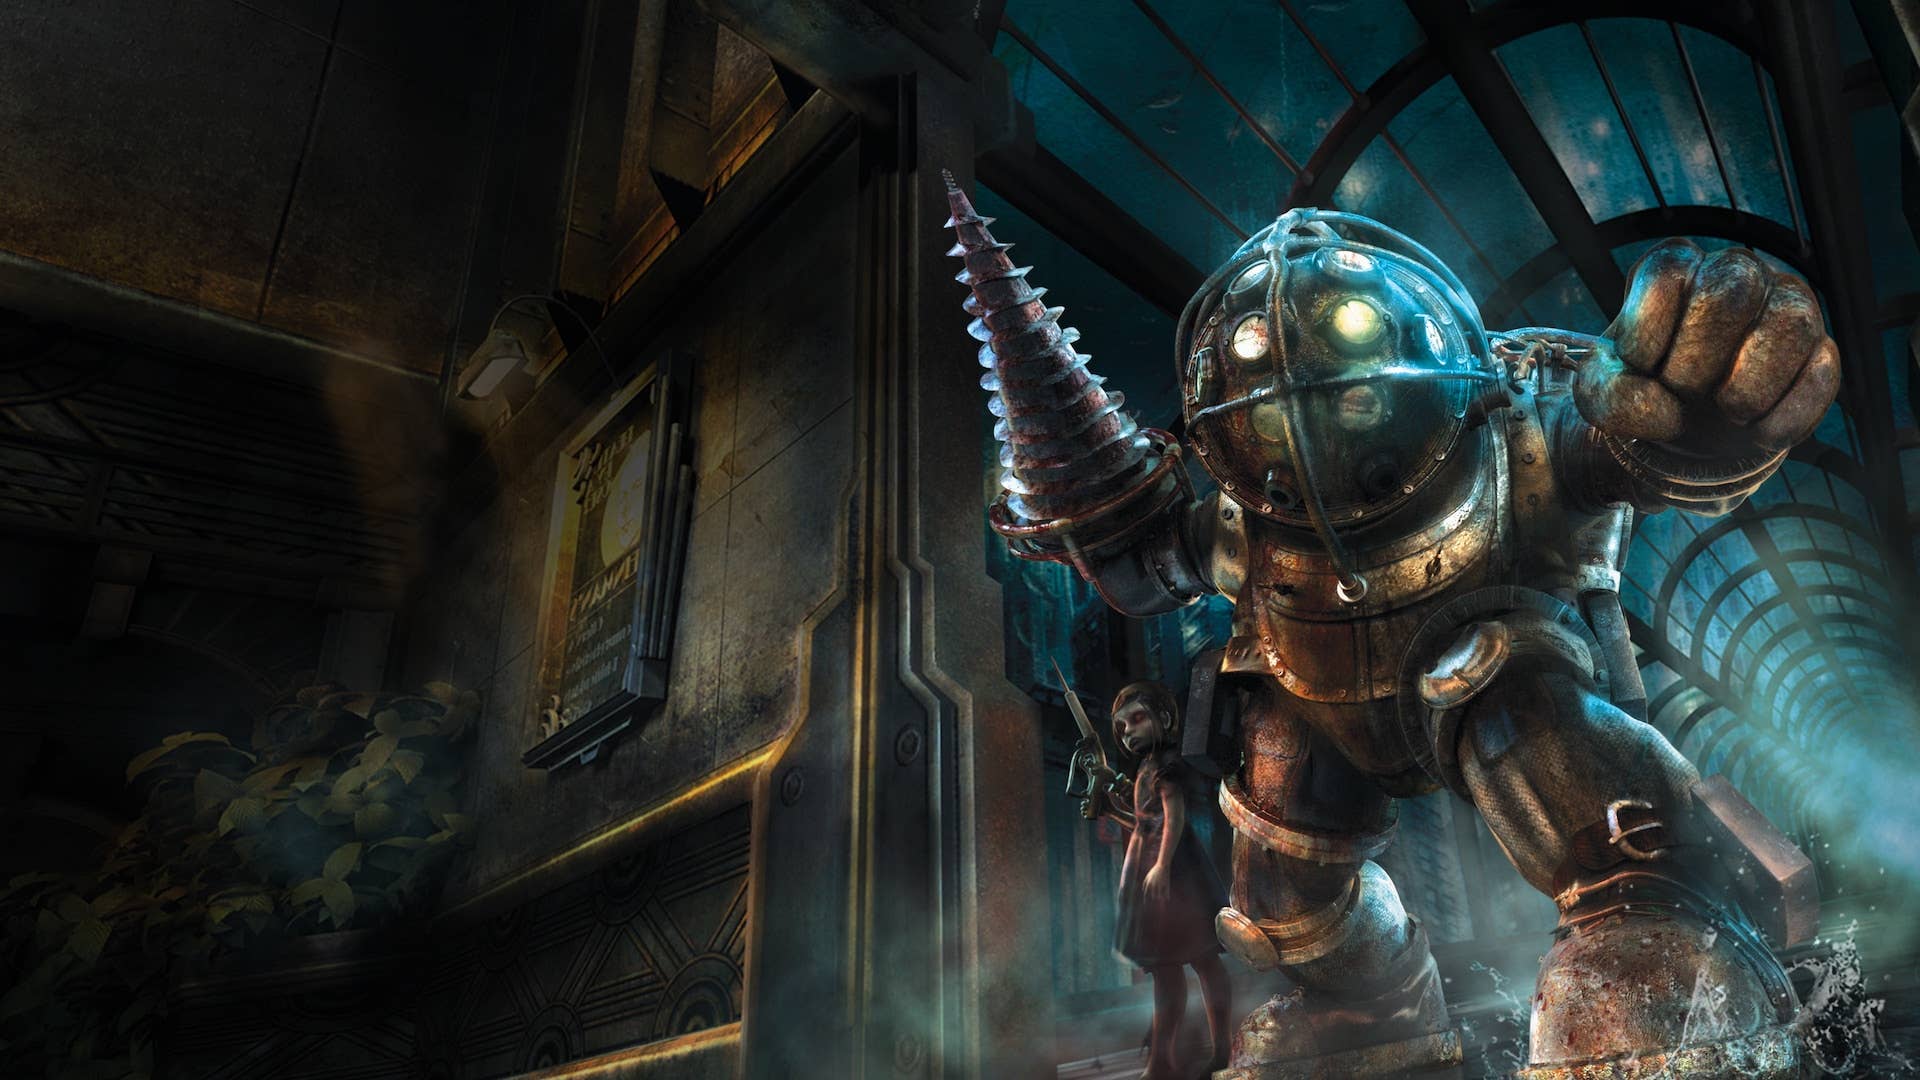 Bioshock image for news story about movie